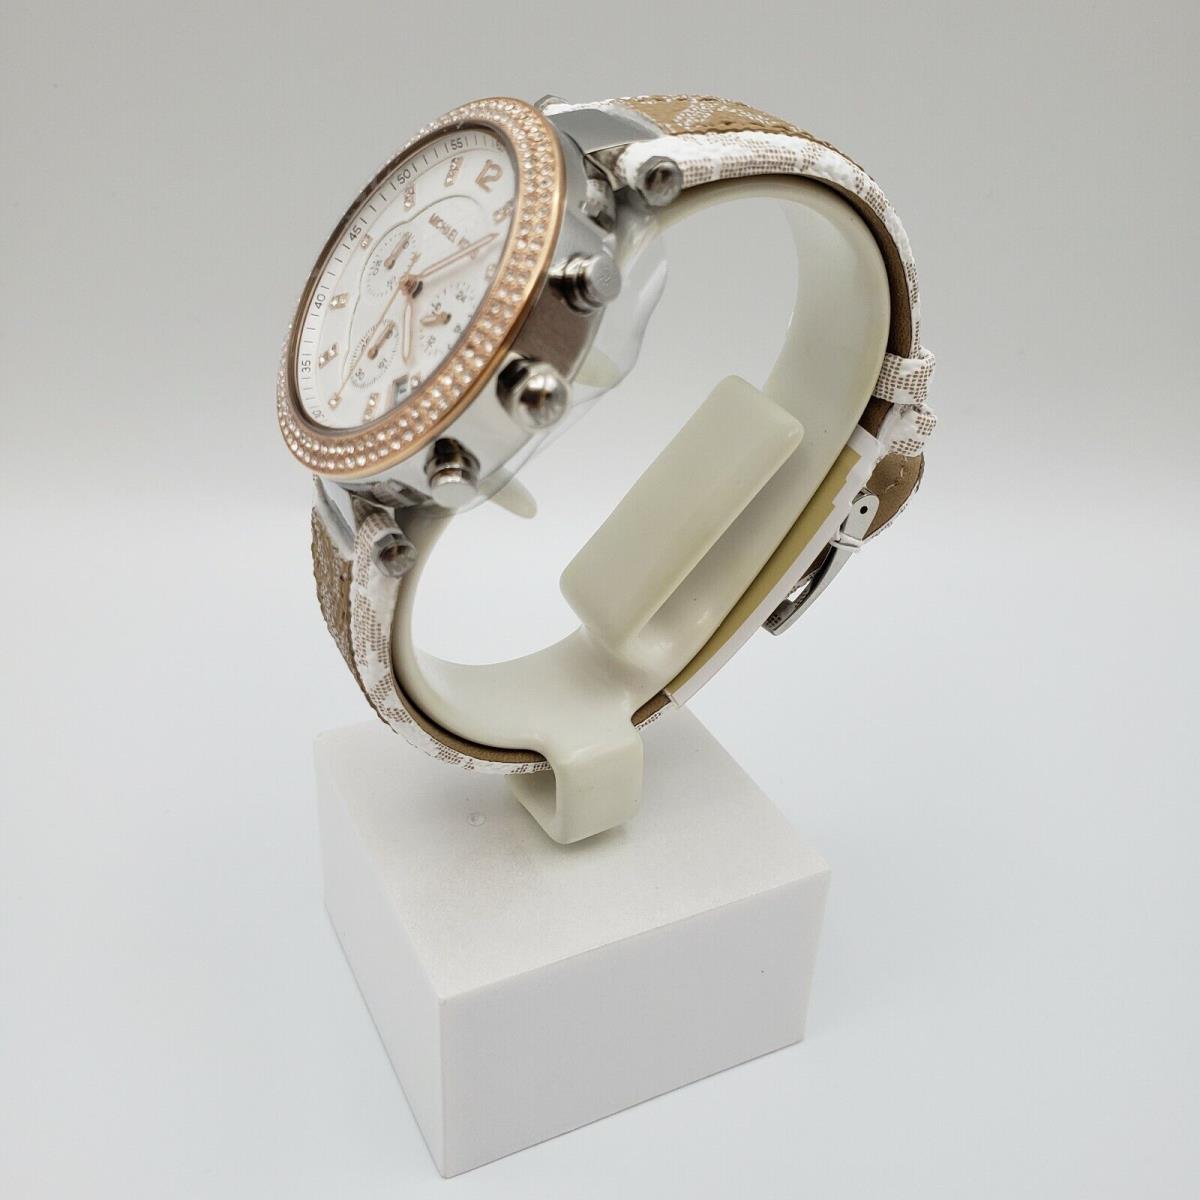 Michael Kors watch Parker - White Dial, Beige Band